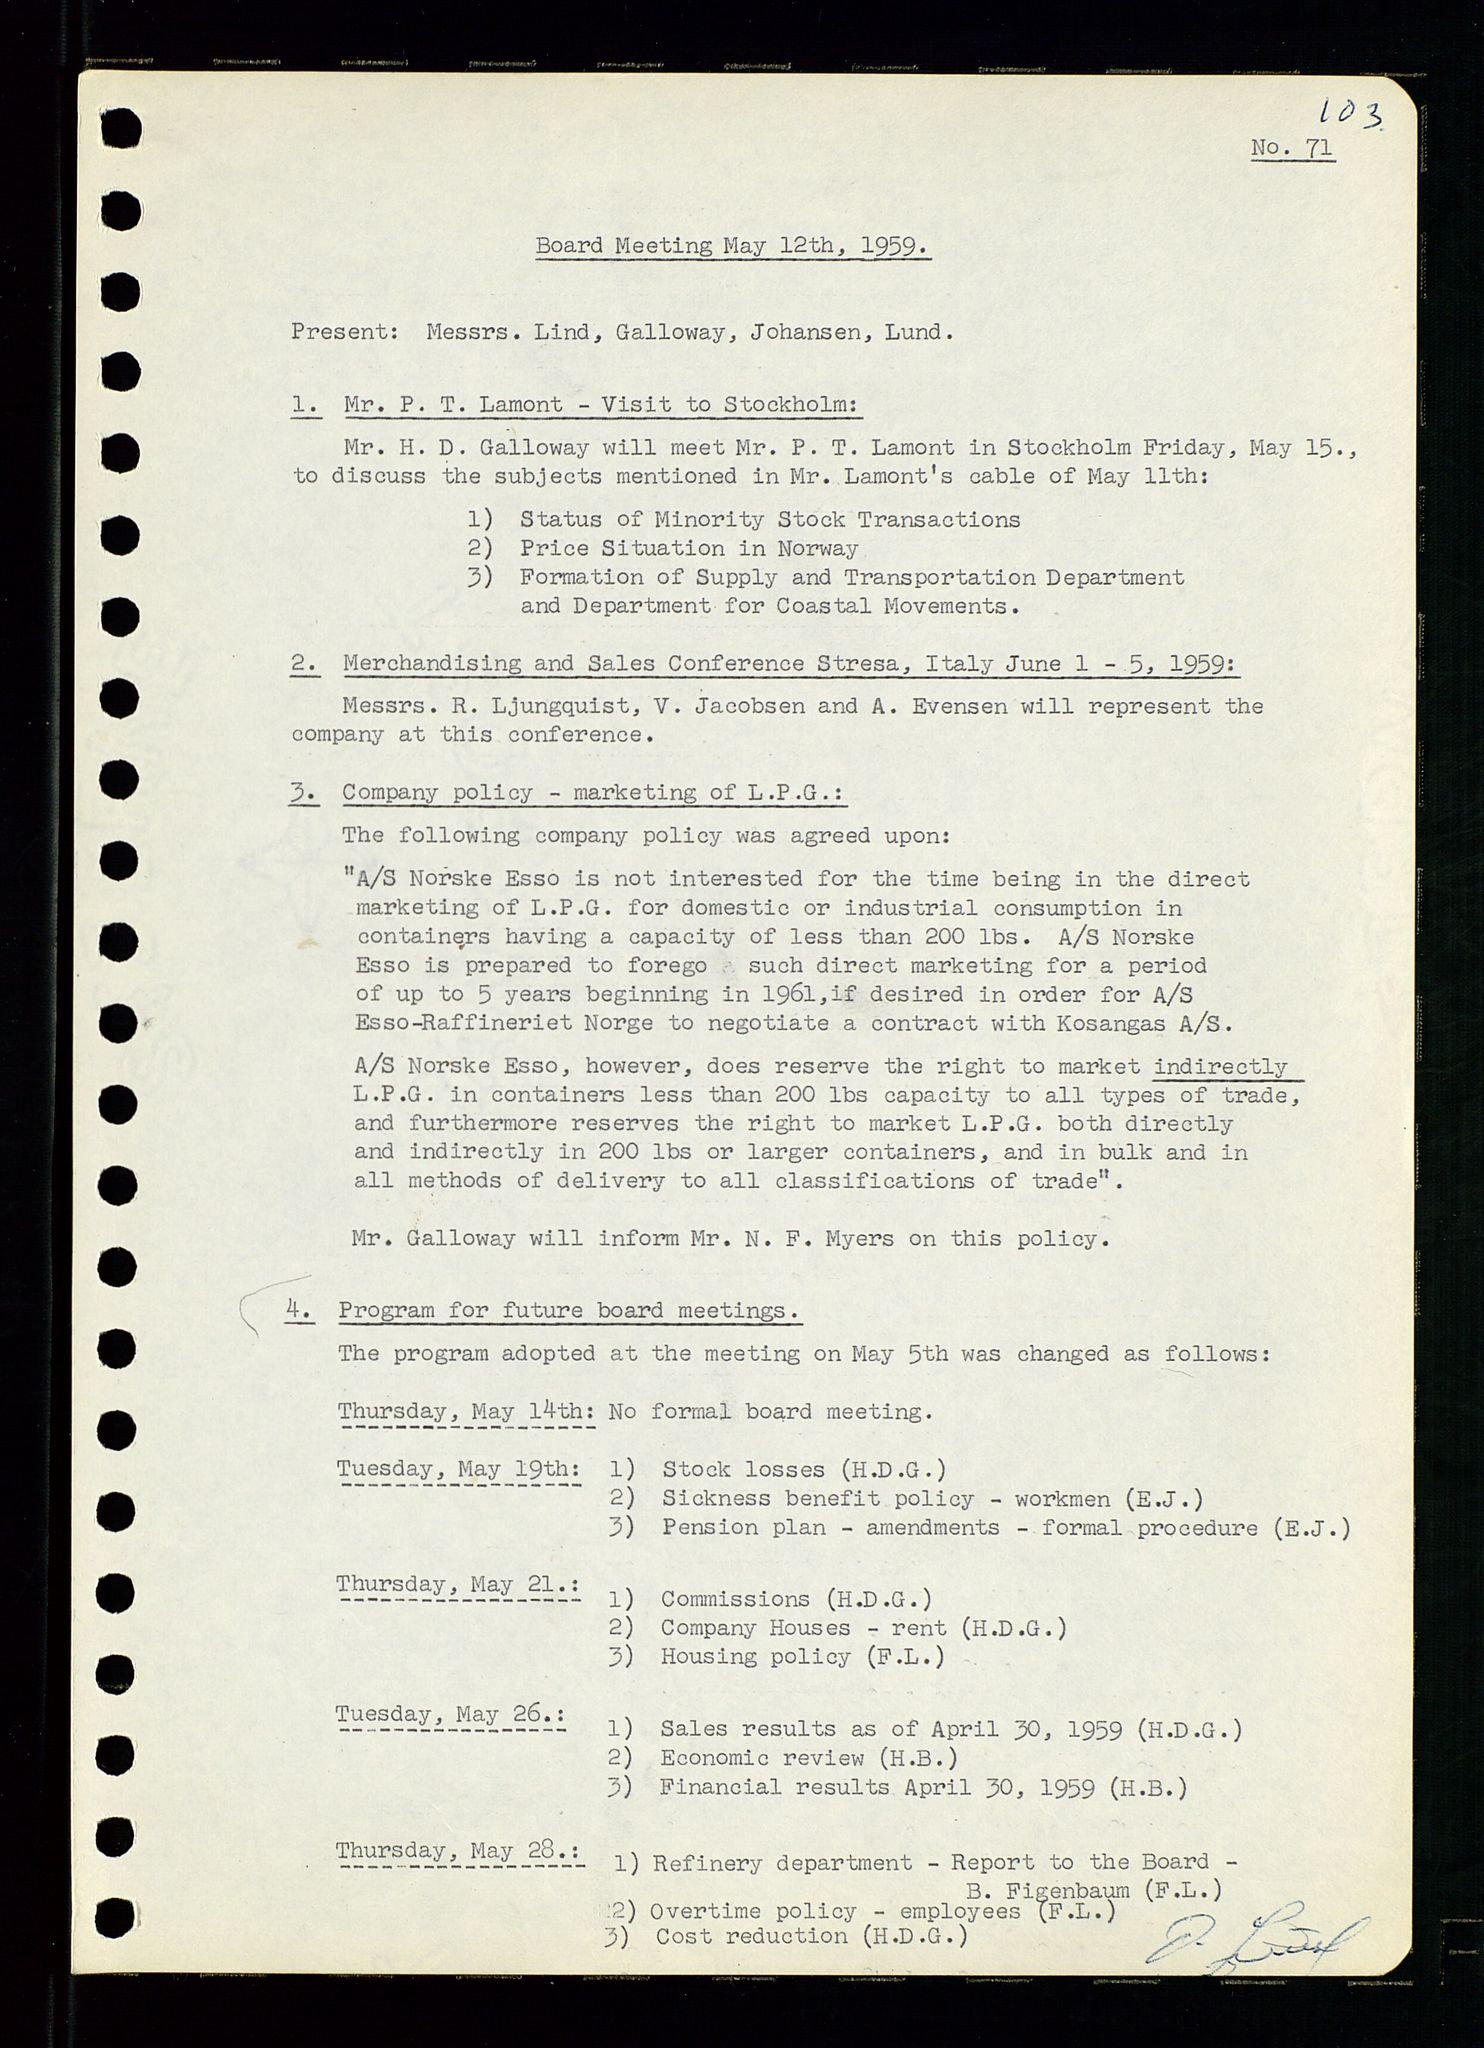 Pa 0982 - Esso Norge A/S, SAST/A-100448/A/Aa/L0001/0001: Den administrerende direksjon Board minutes (styrereferater) / Den administrerende direksjon Board minutes (styrereferater), 1958-1959, p. 103